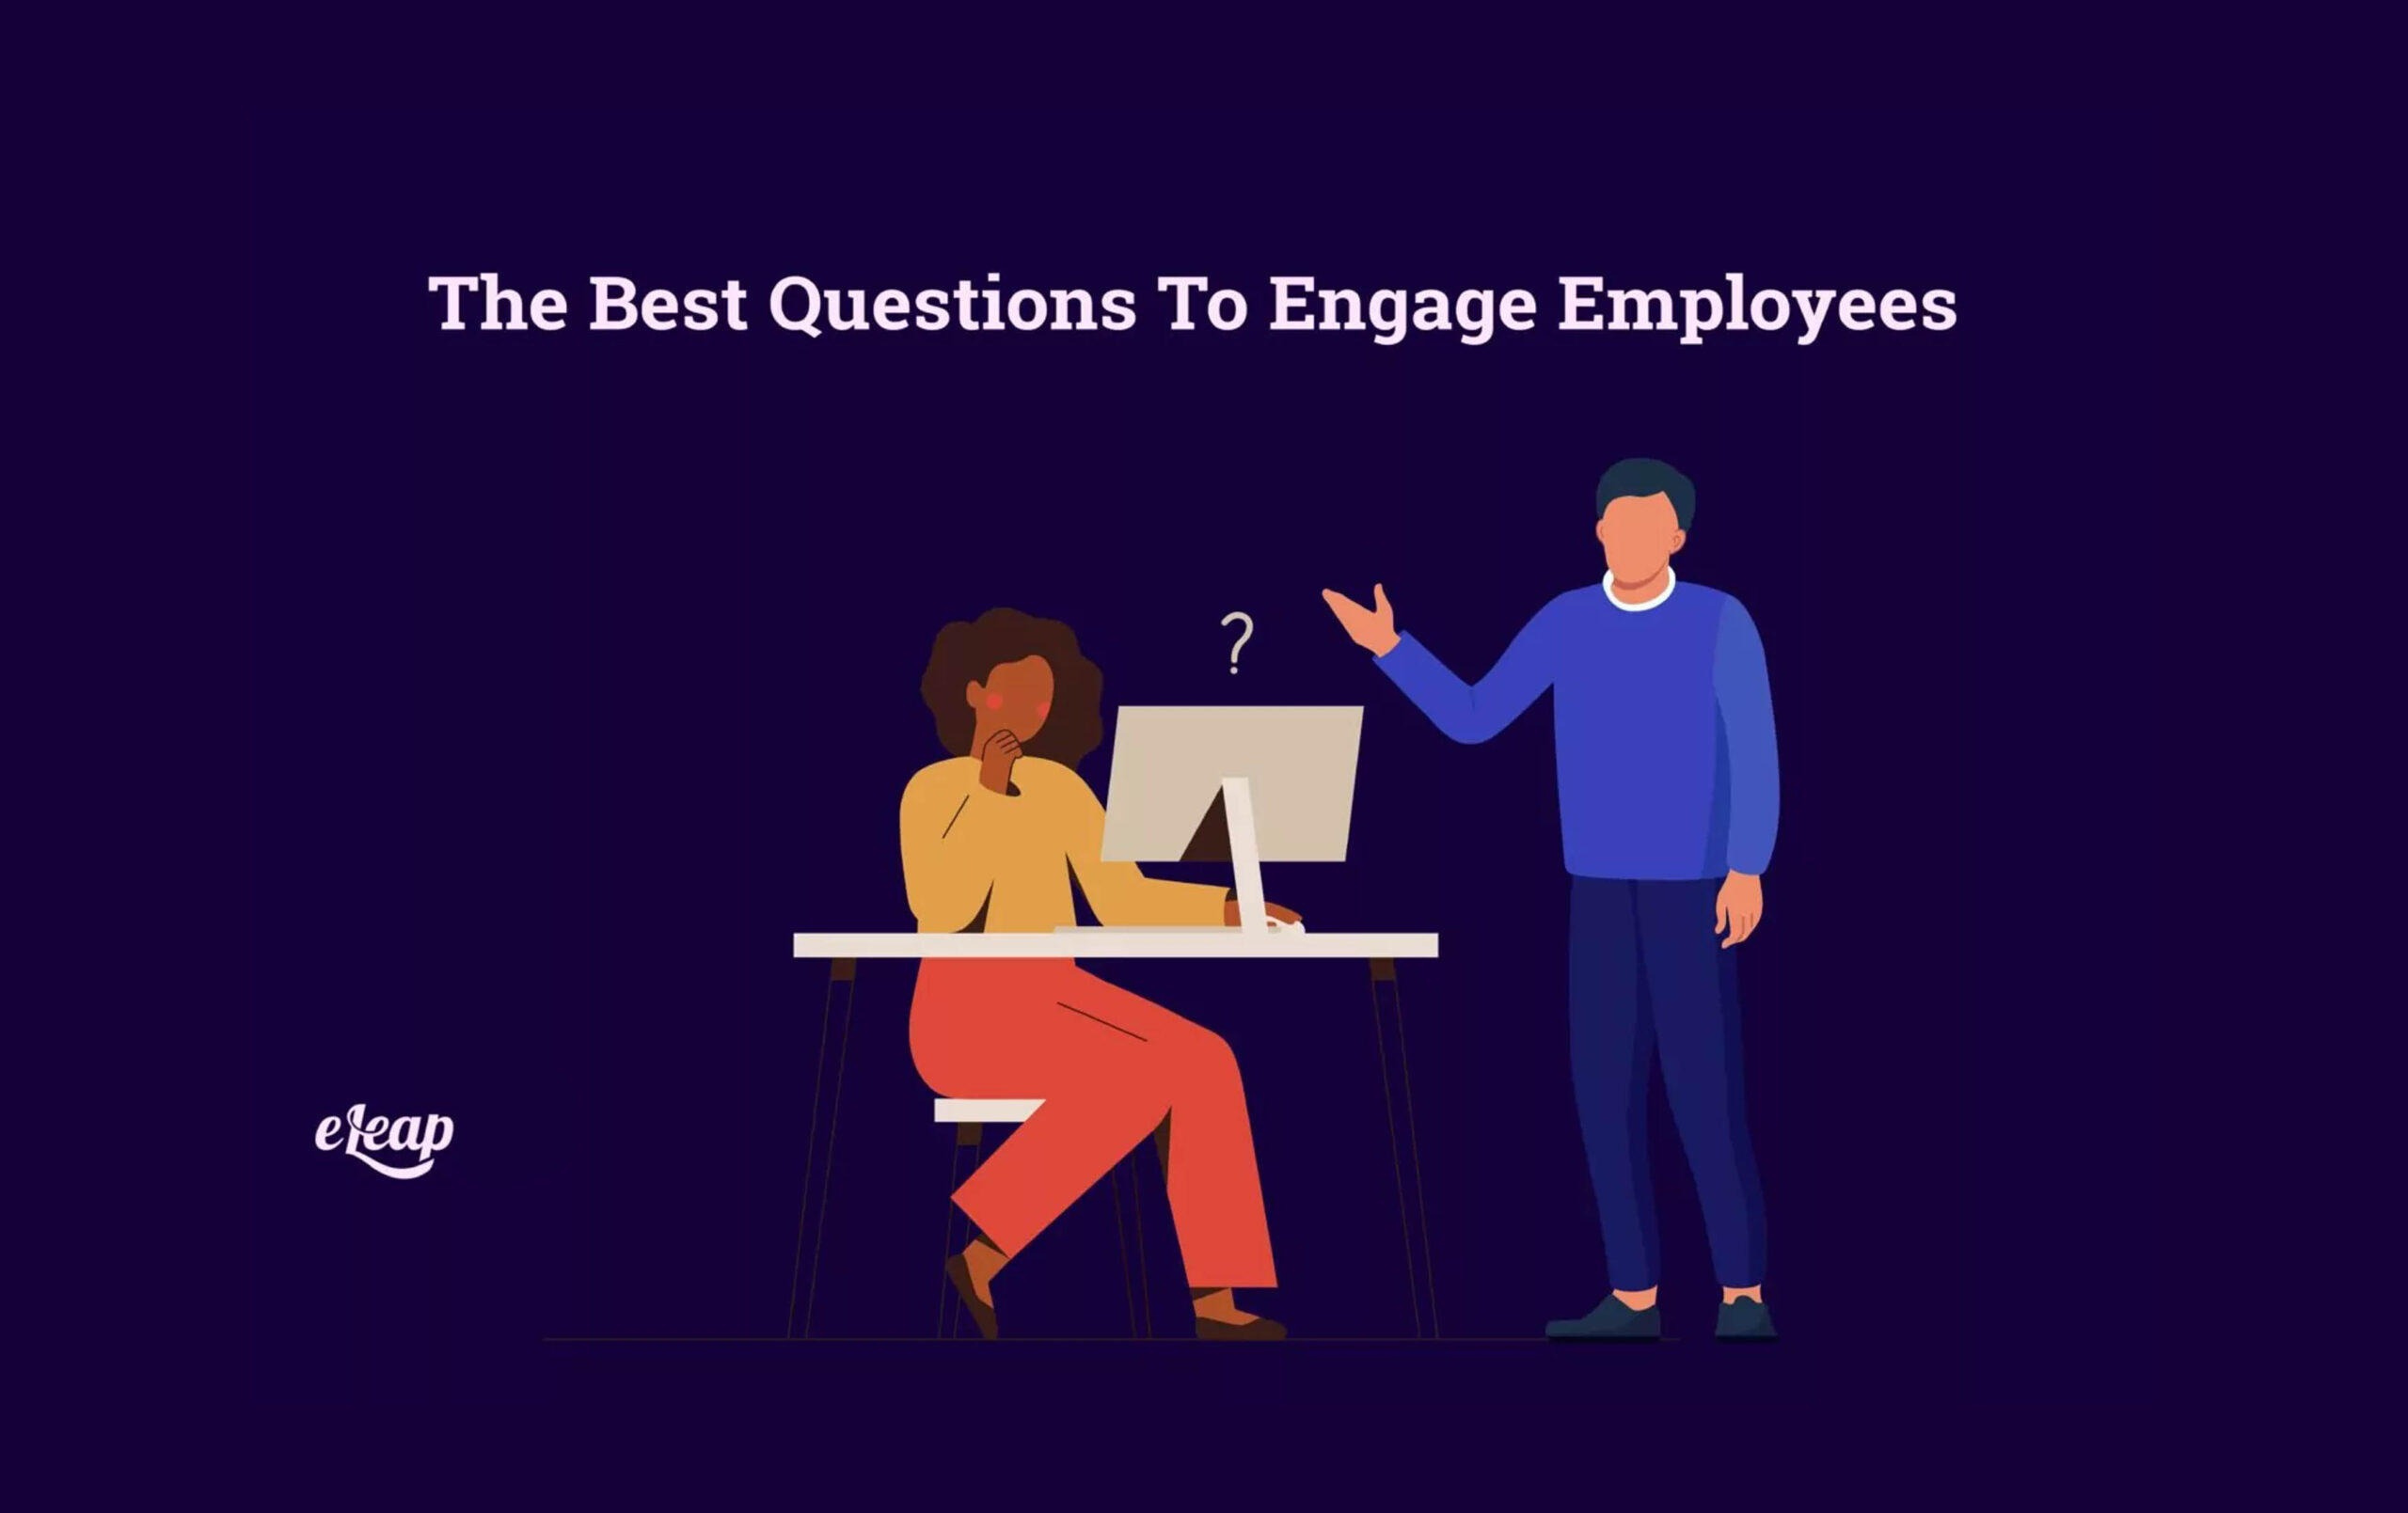 The Best Questions to Engage Employees - eLeaP